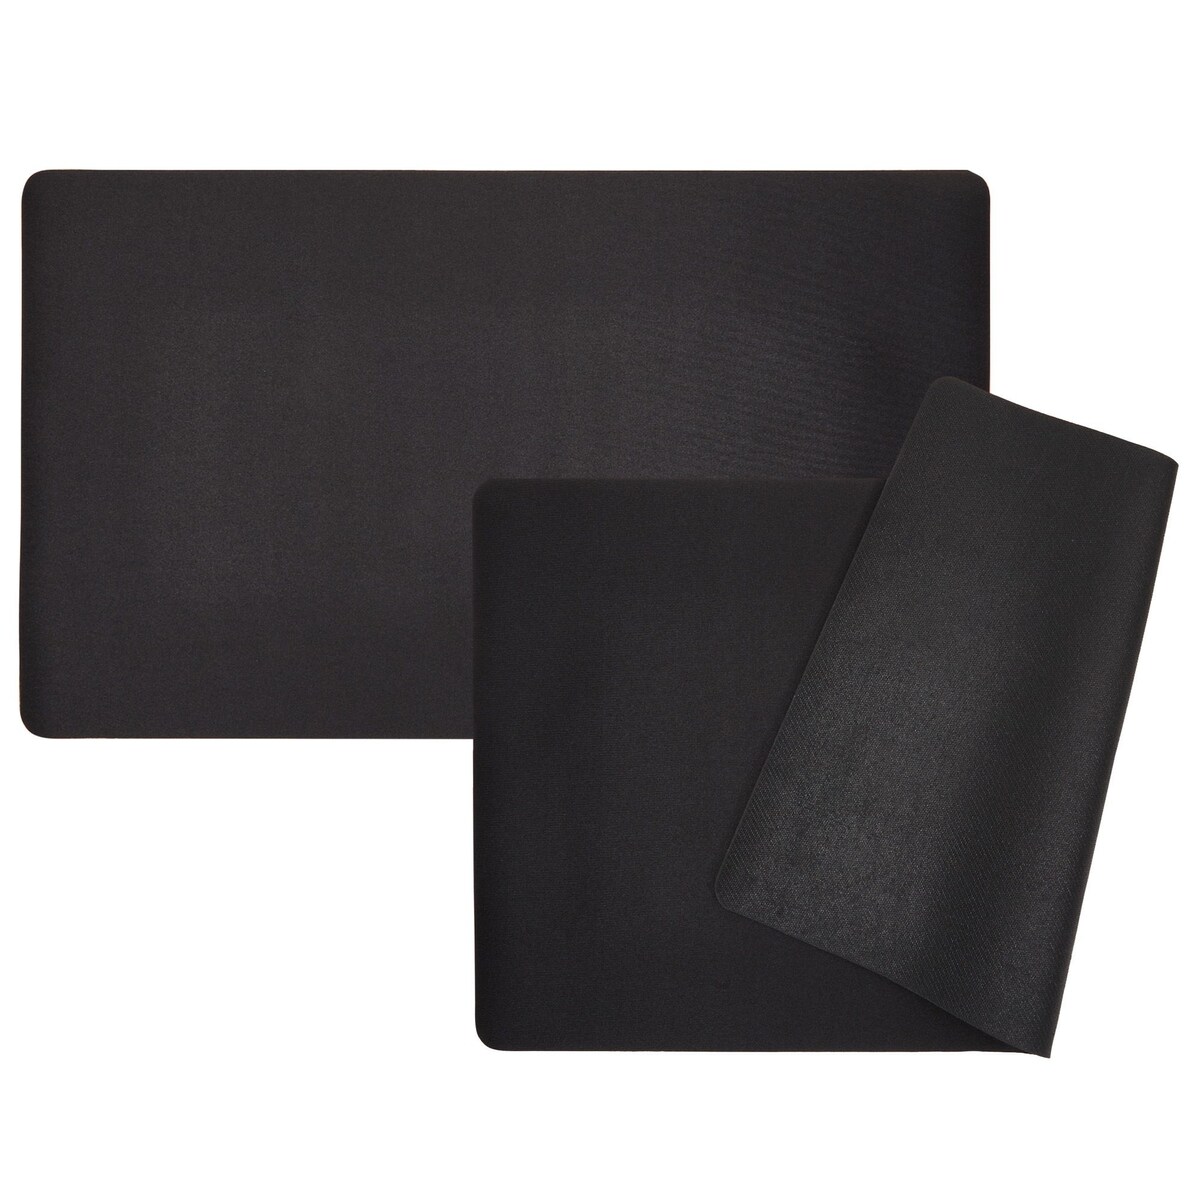 2 Pack Card Game Mat for MTG &#x2013; Board Game, Magic, and TCG Playmat, Color Black (24x14 in)